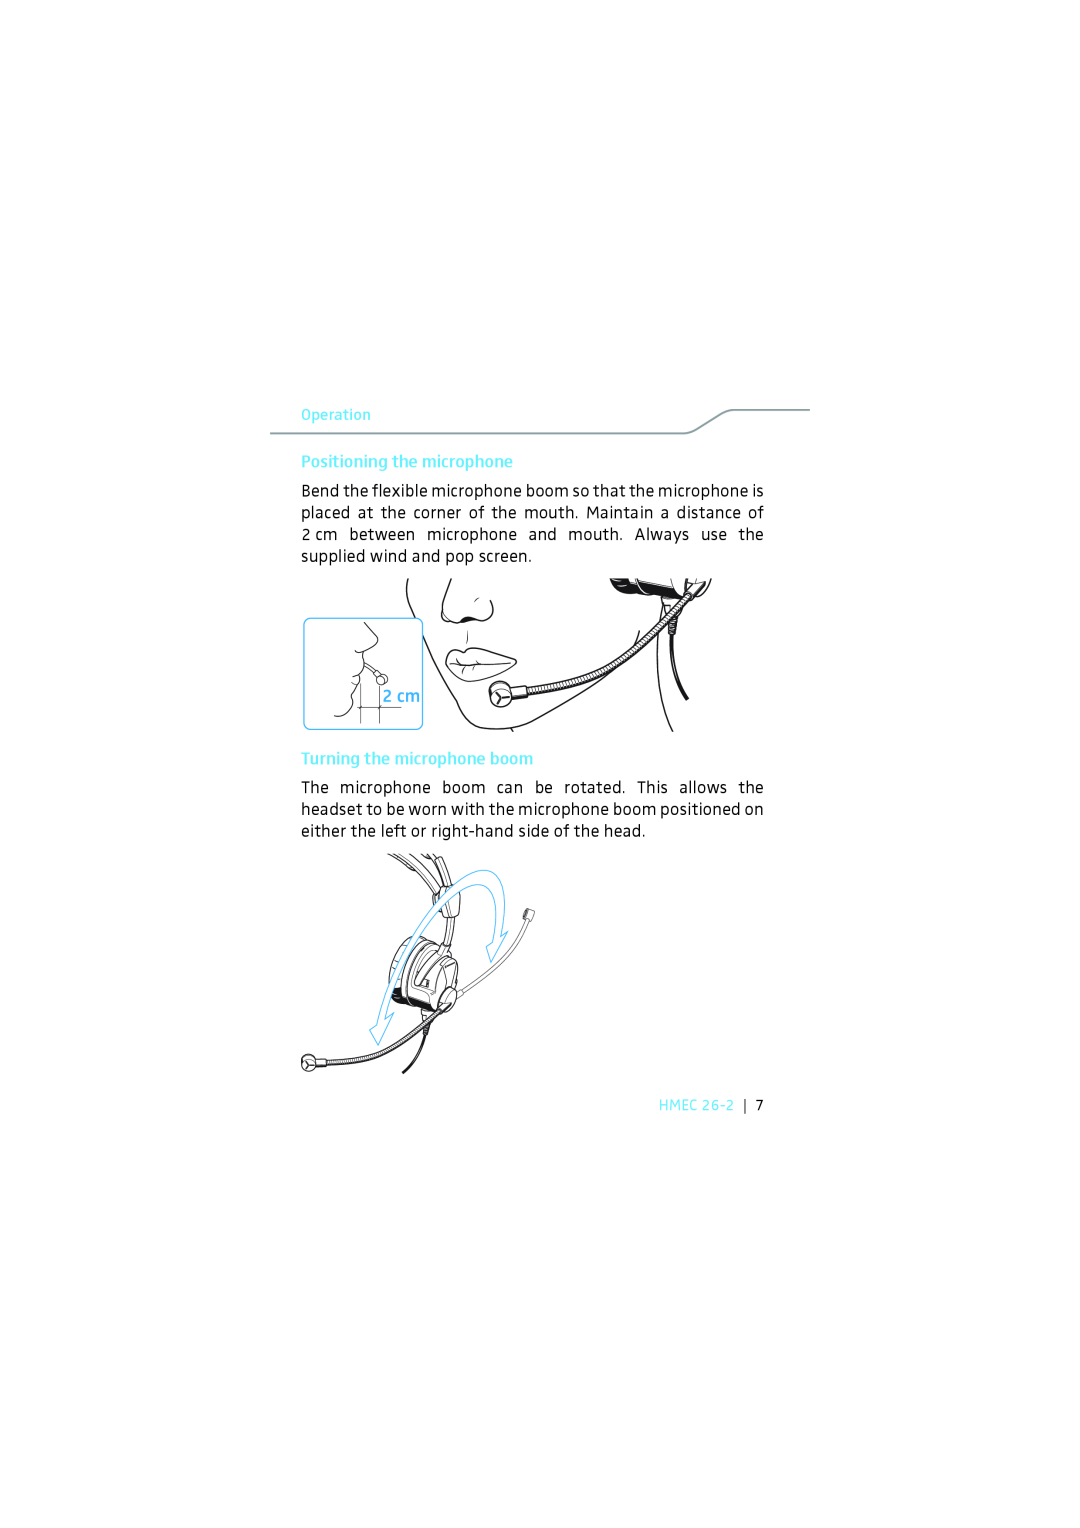 Sennheiser HMEC 26-2 instruction manual Positioning the microphone, Turning the microphone boom 